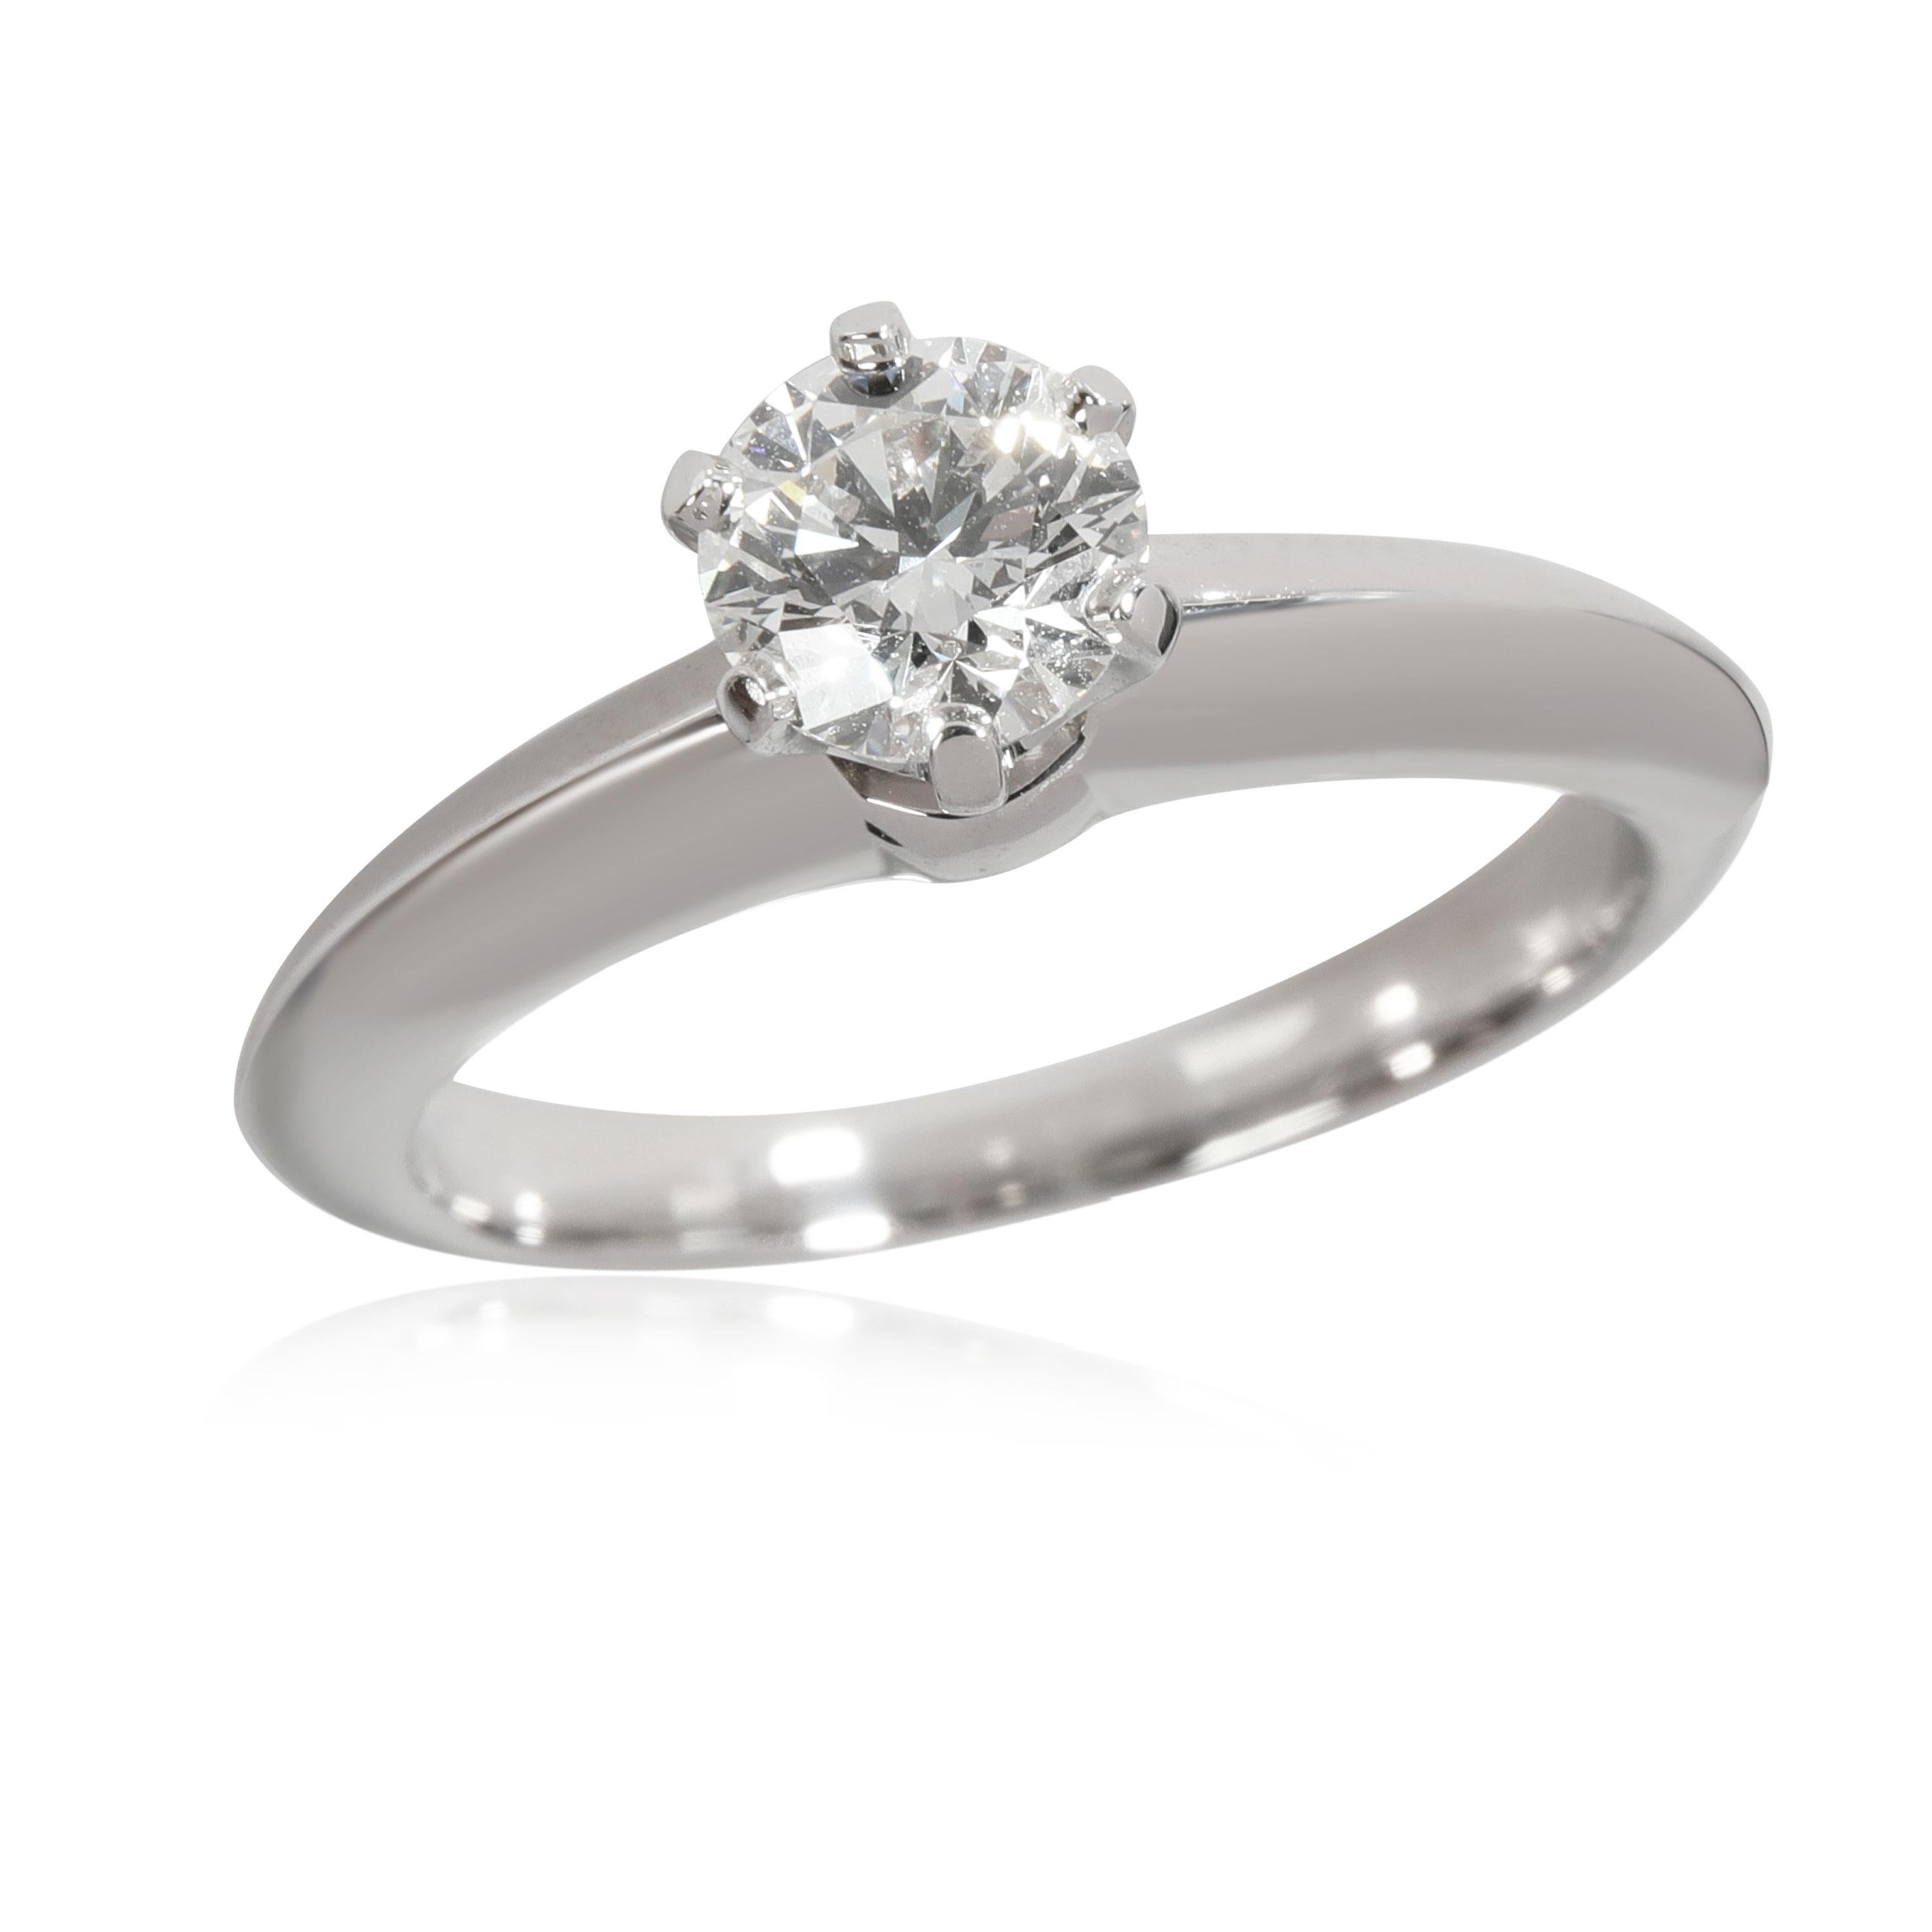 Tiffany & Co. Diamond Engagement Ring in 950 Platinum H VS1 0.53 CTW

PRIMARY DETAILS
SKU: 112084
Listing Title: Tiffany & Co. Diamond Engagement Ring in 950 Platinum H VS1 0.53 CTW
Condition Description: Retails for 6,100 USD. In excellent